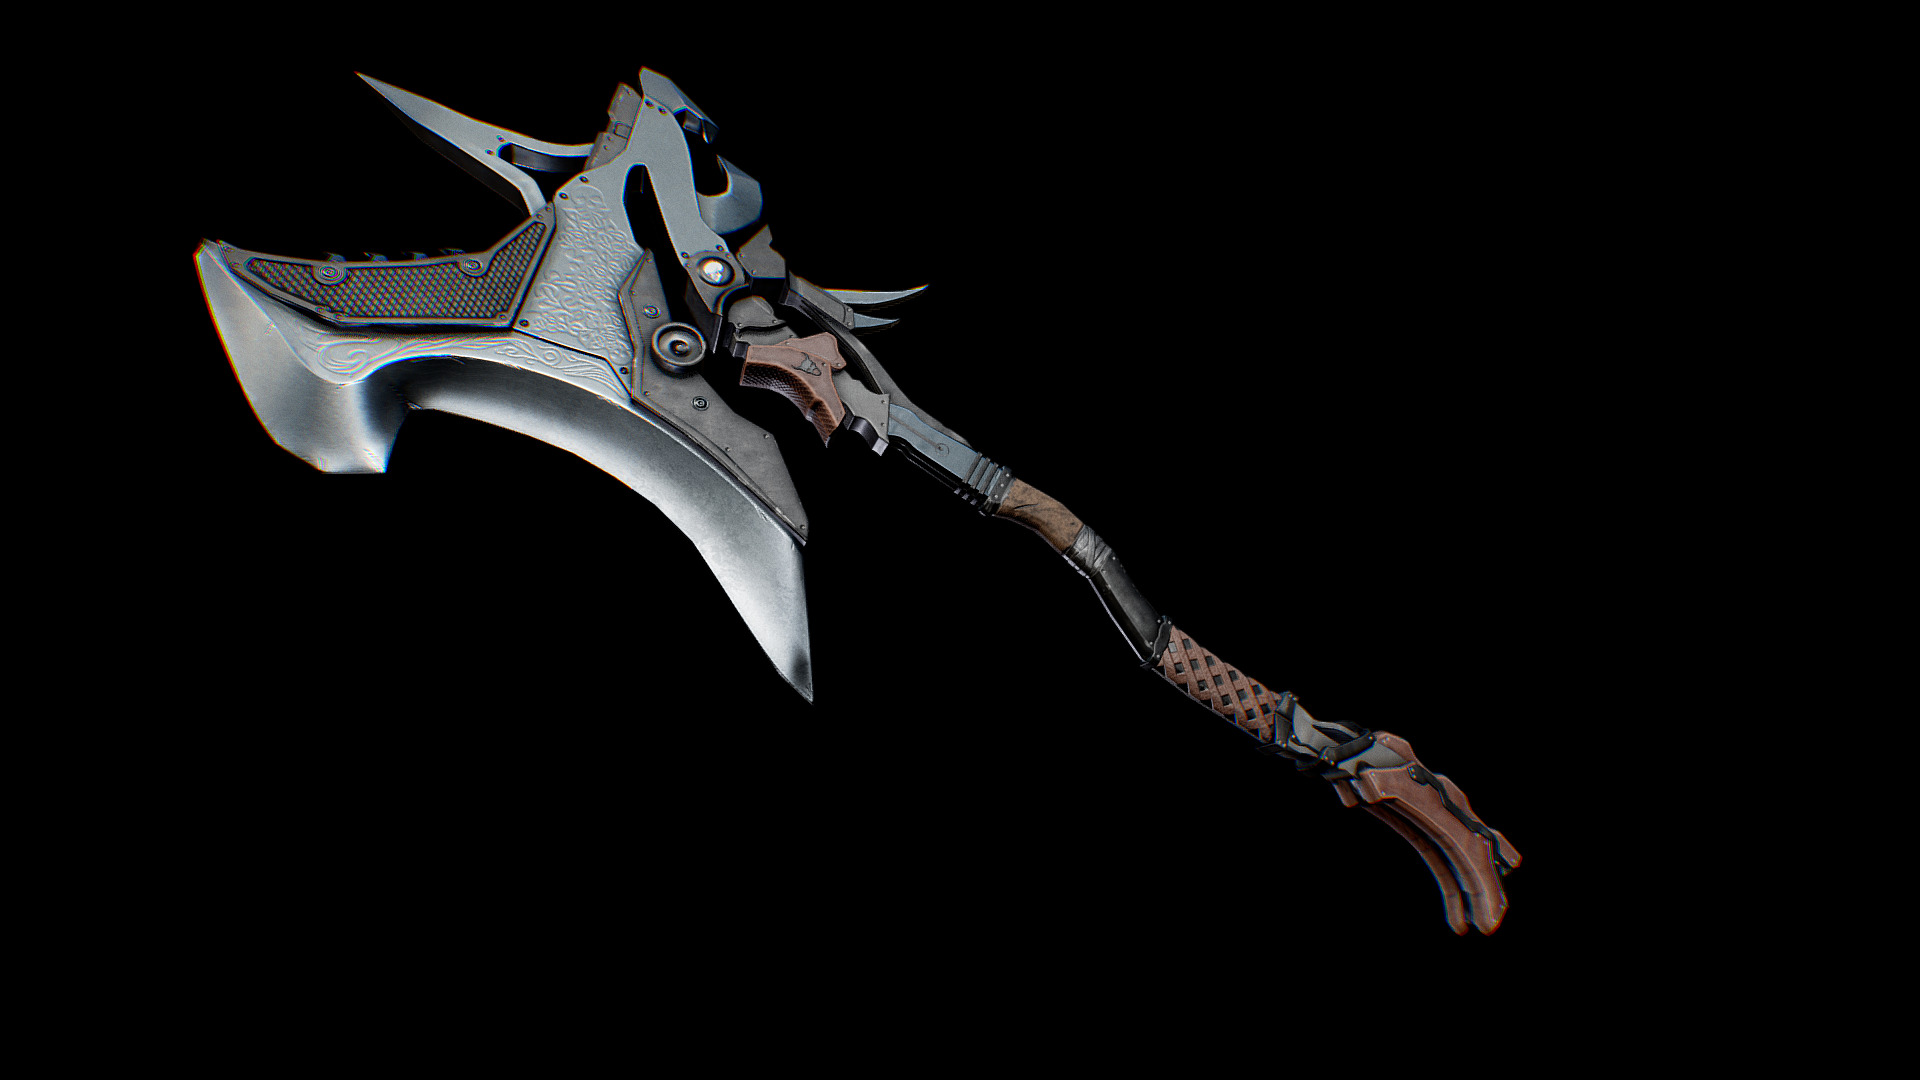 Great Axe.

Polycount: 13400 triangles

Screenshots are rendered in real-time in Marmoset Toolbag.

Game-ready, suitable for any modern game-engine such as Unity or Unreal Engine.

PBR Textures 2048x2048 (PBR set, Unity 5 Set, Unreal Engine 4 set)

2 Materials.

Textures include: diffuse, ambient occlusion, normals, roughness, metallic.

Source file is .blend. Model is made in Blender, textured in Substance Painter 3d model